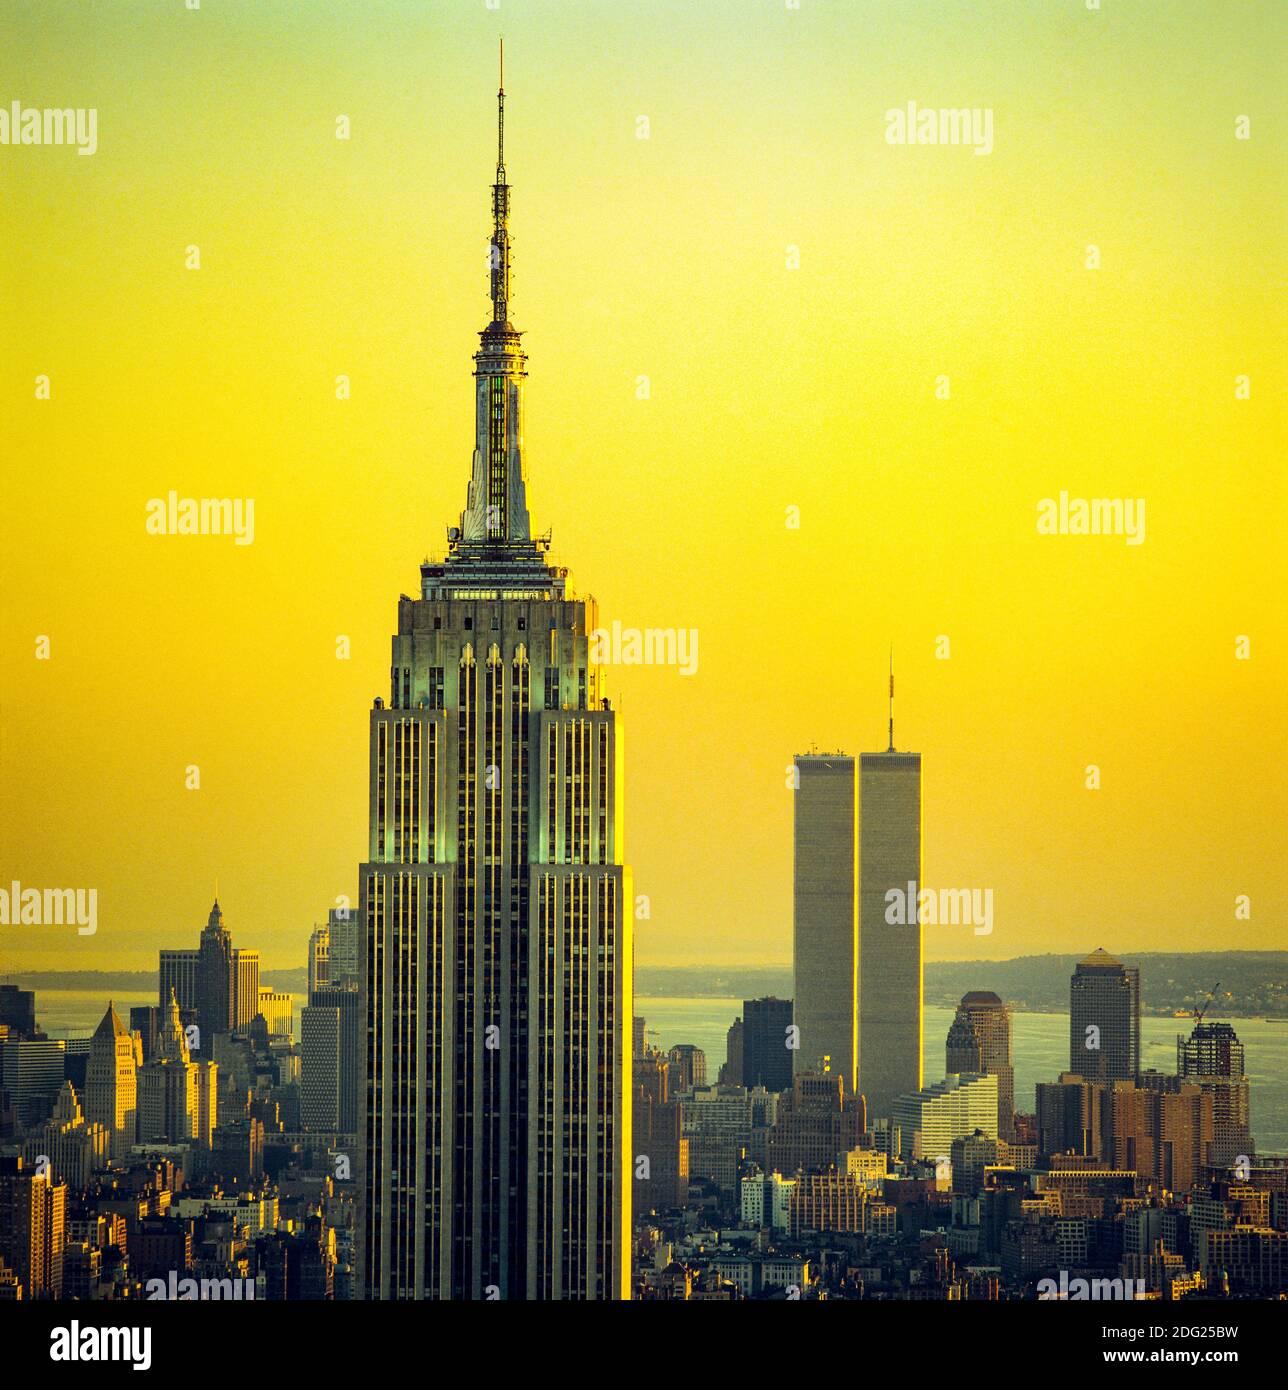 New York 1985, Empire State building , WTC World Trade Center twin towers in the distance, sunset, Manhattan skyline, New York City, NY, NYC, USA, Stock Photo